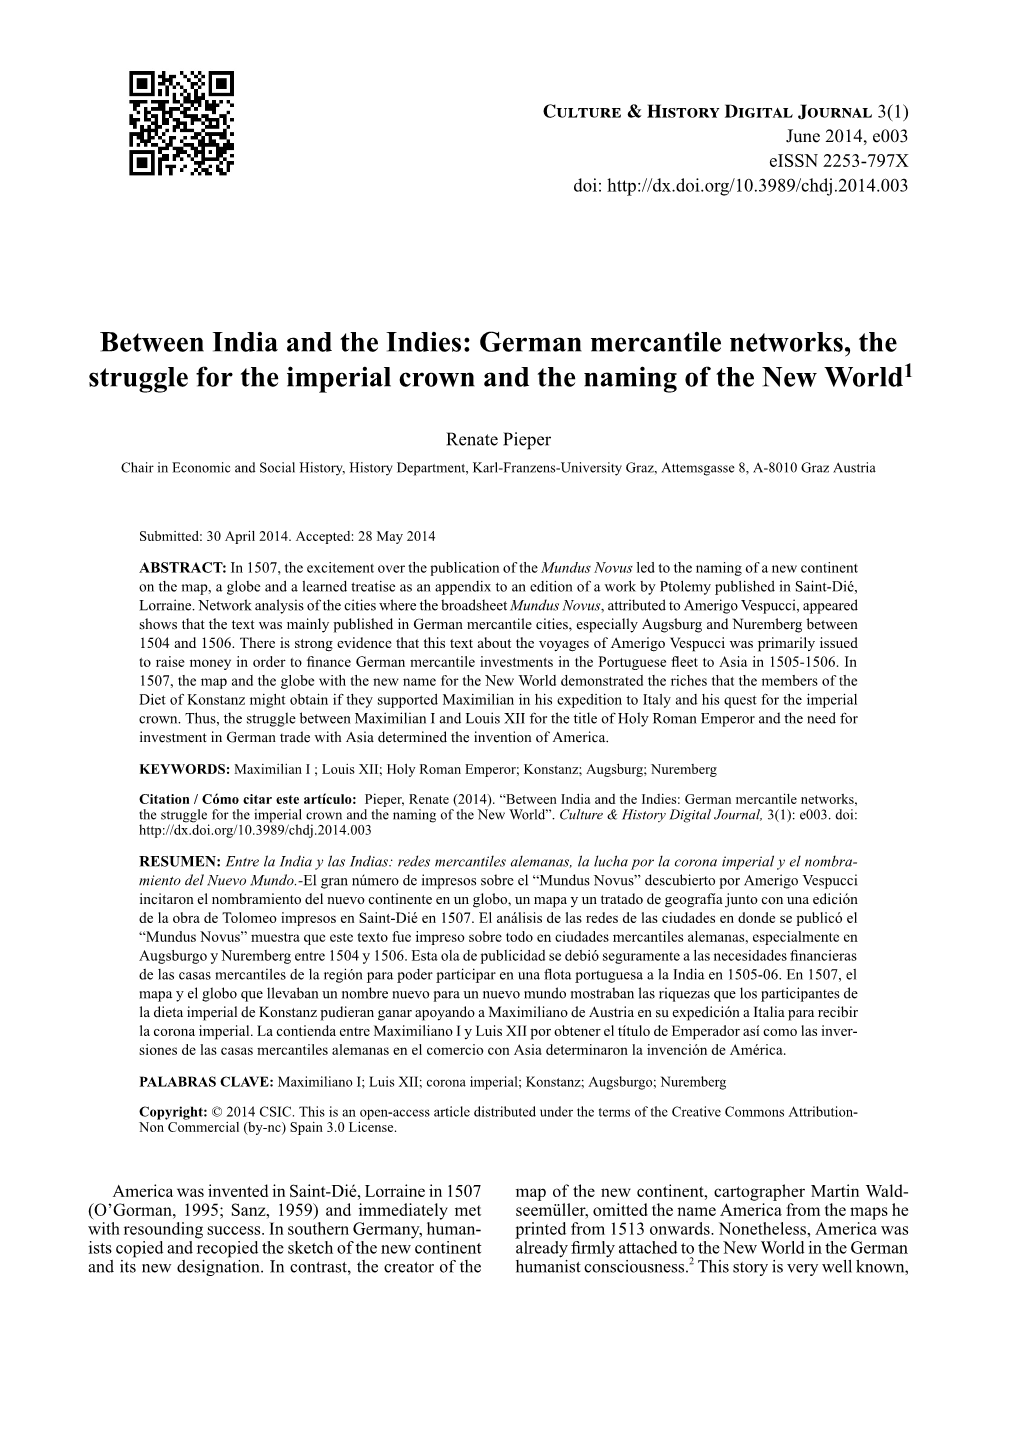 Between India and the Indies: German Mercantile Networks, the Struggle for the Imperial Crown and the Naming of the New World; E